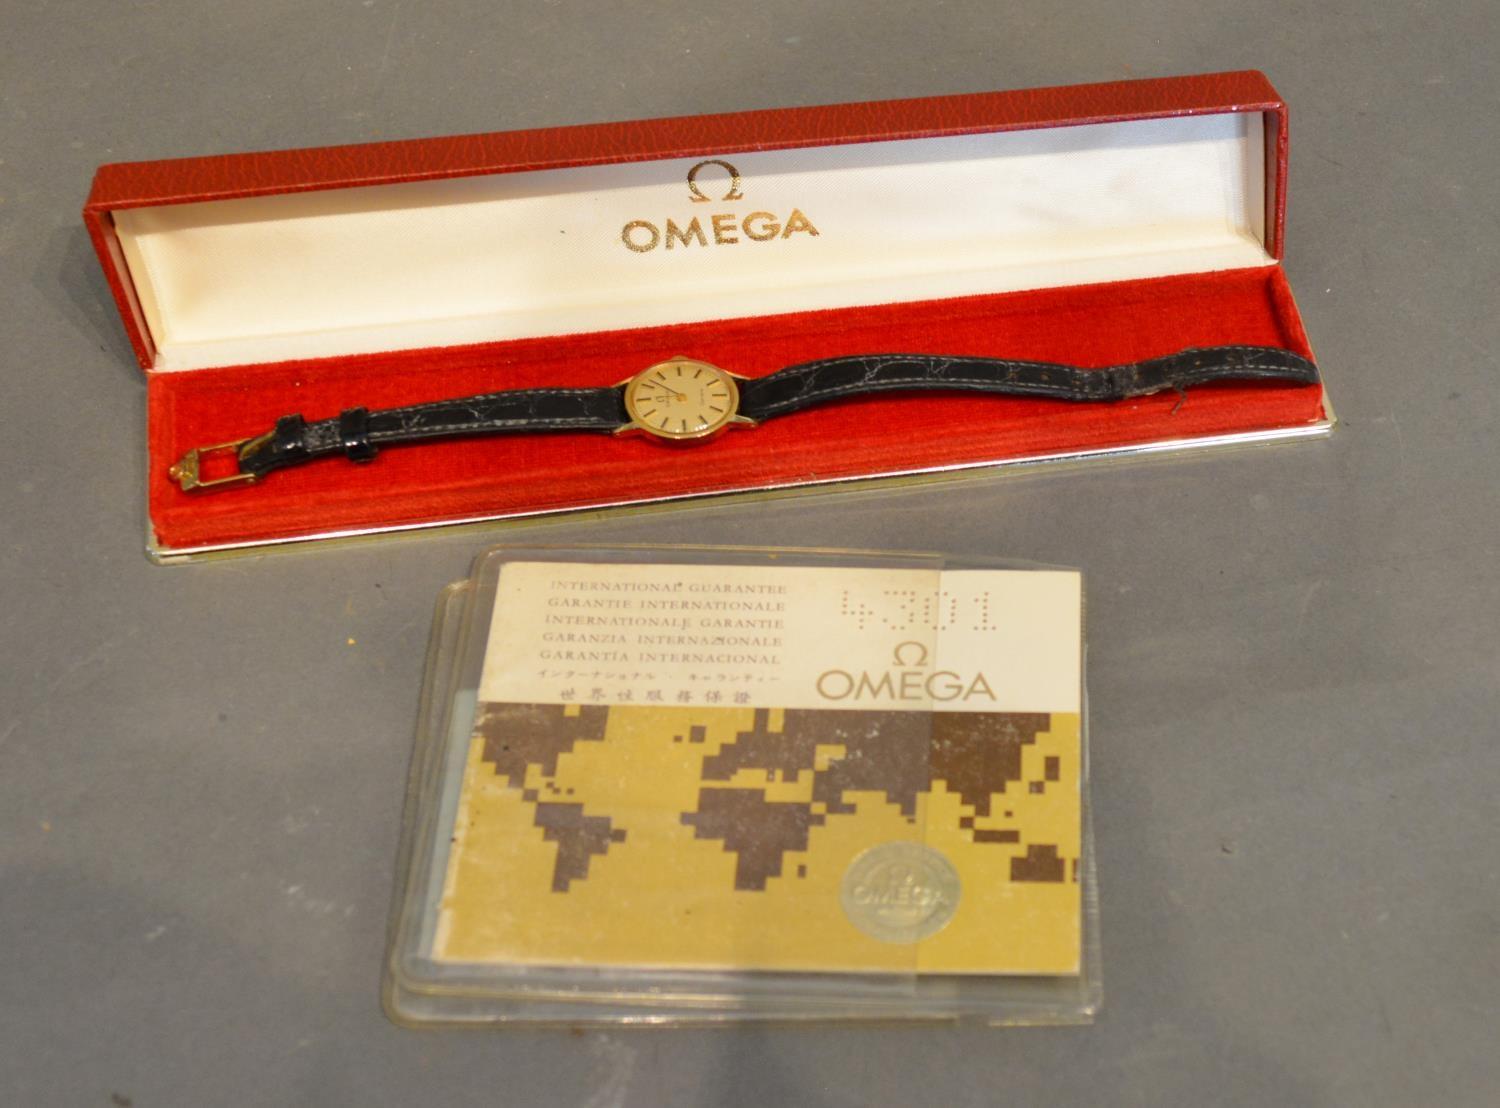 An Omega Ladies Wrist Watch, within original box with paperwork